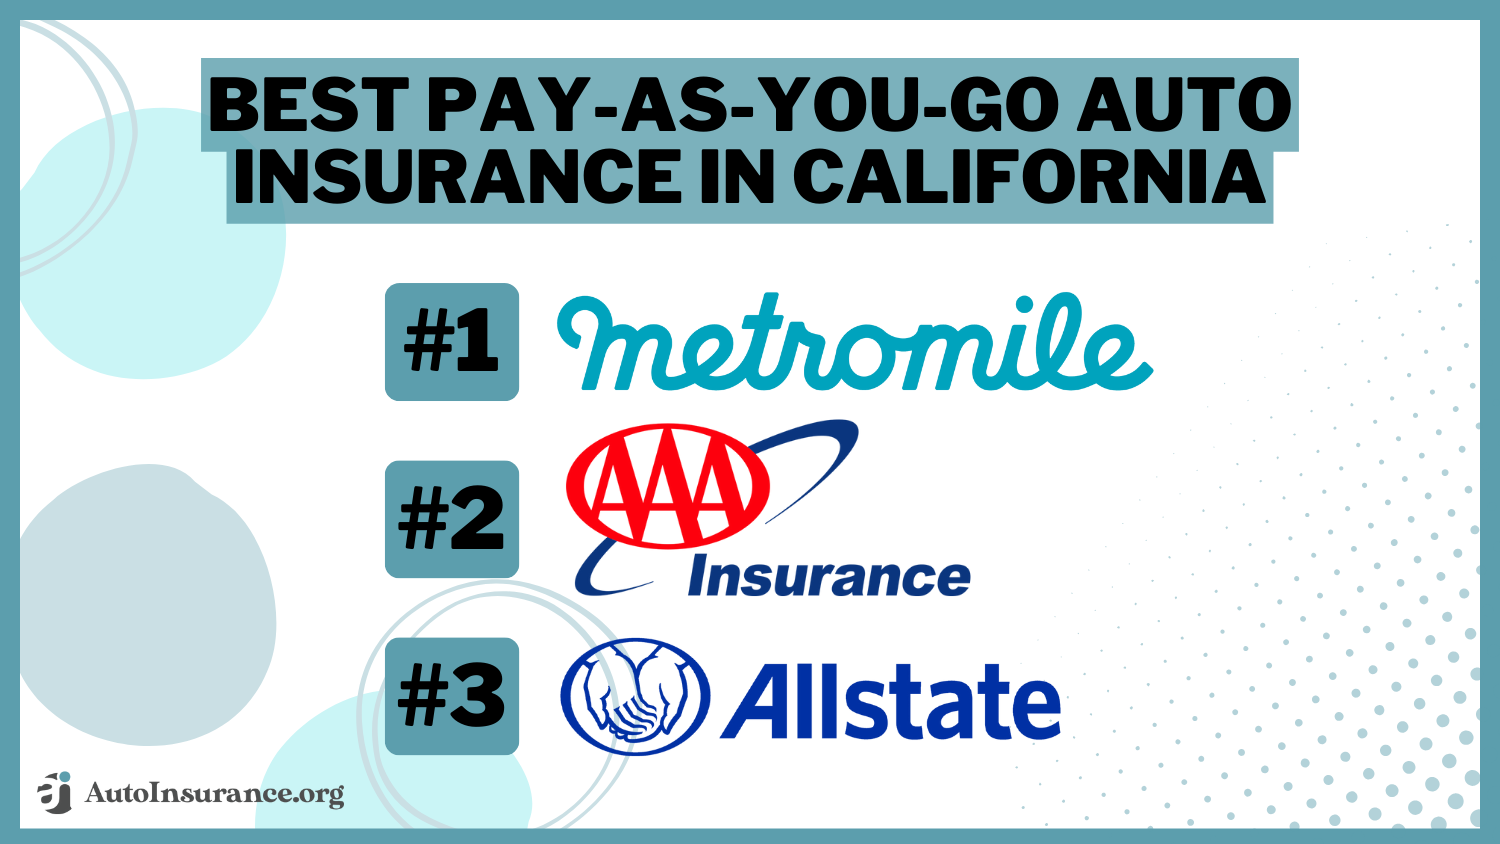 best pay-as-you-go auto insurance in California: Metromile, AAA, Allstate